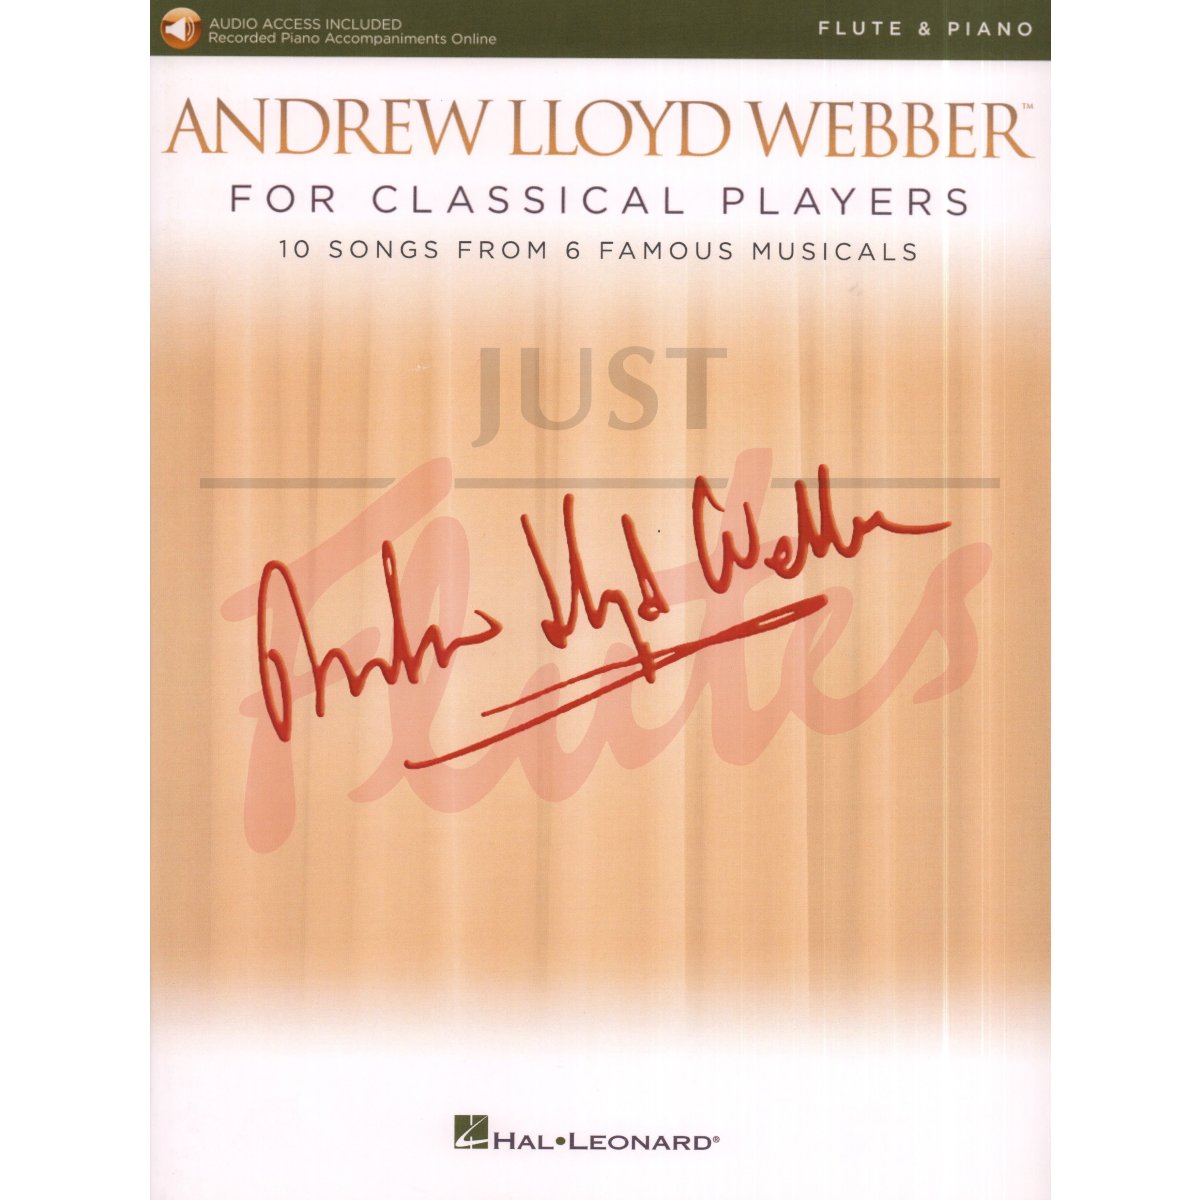 Andrew Lloyd Webber for Classical Players for Flute and Piano